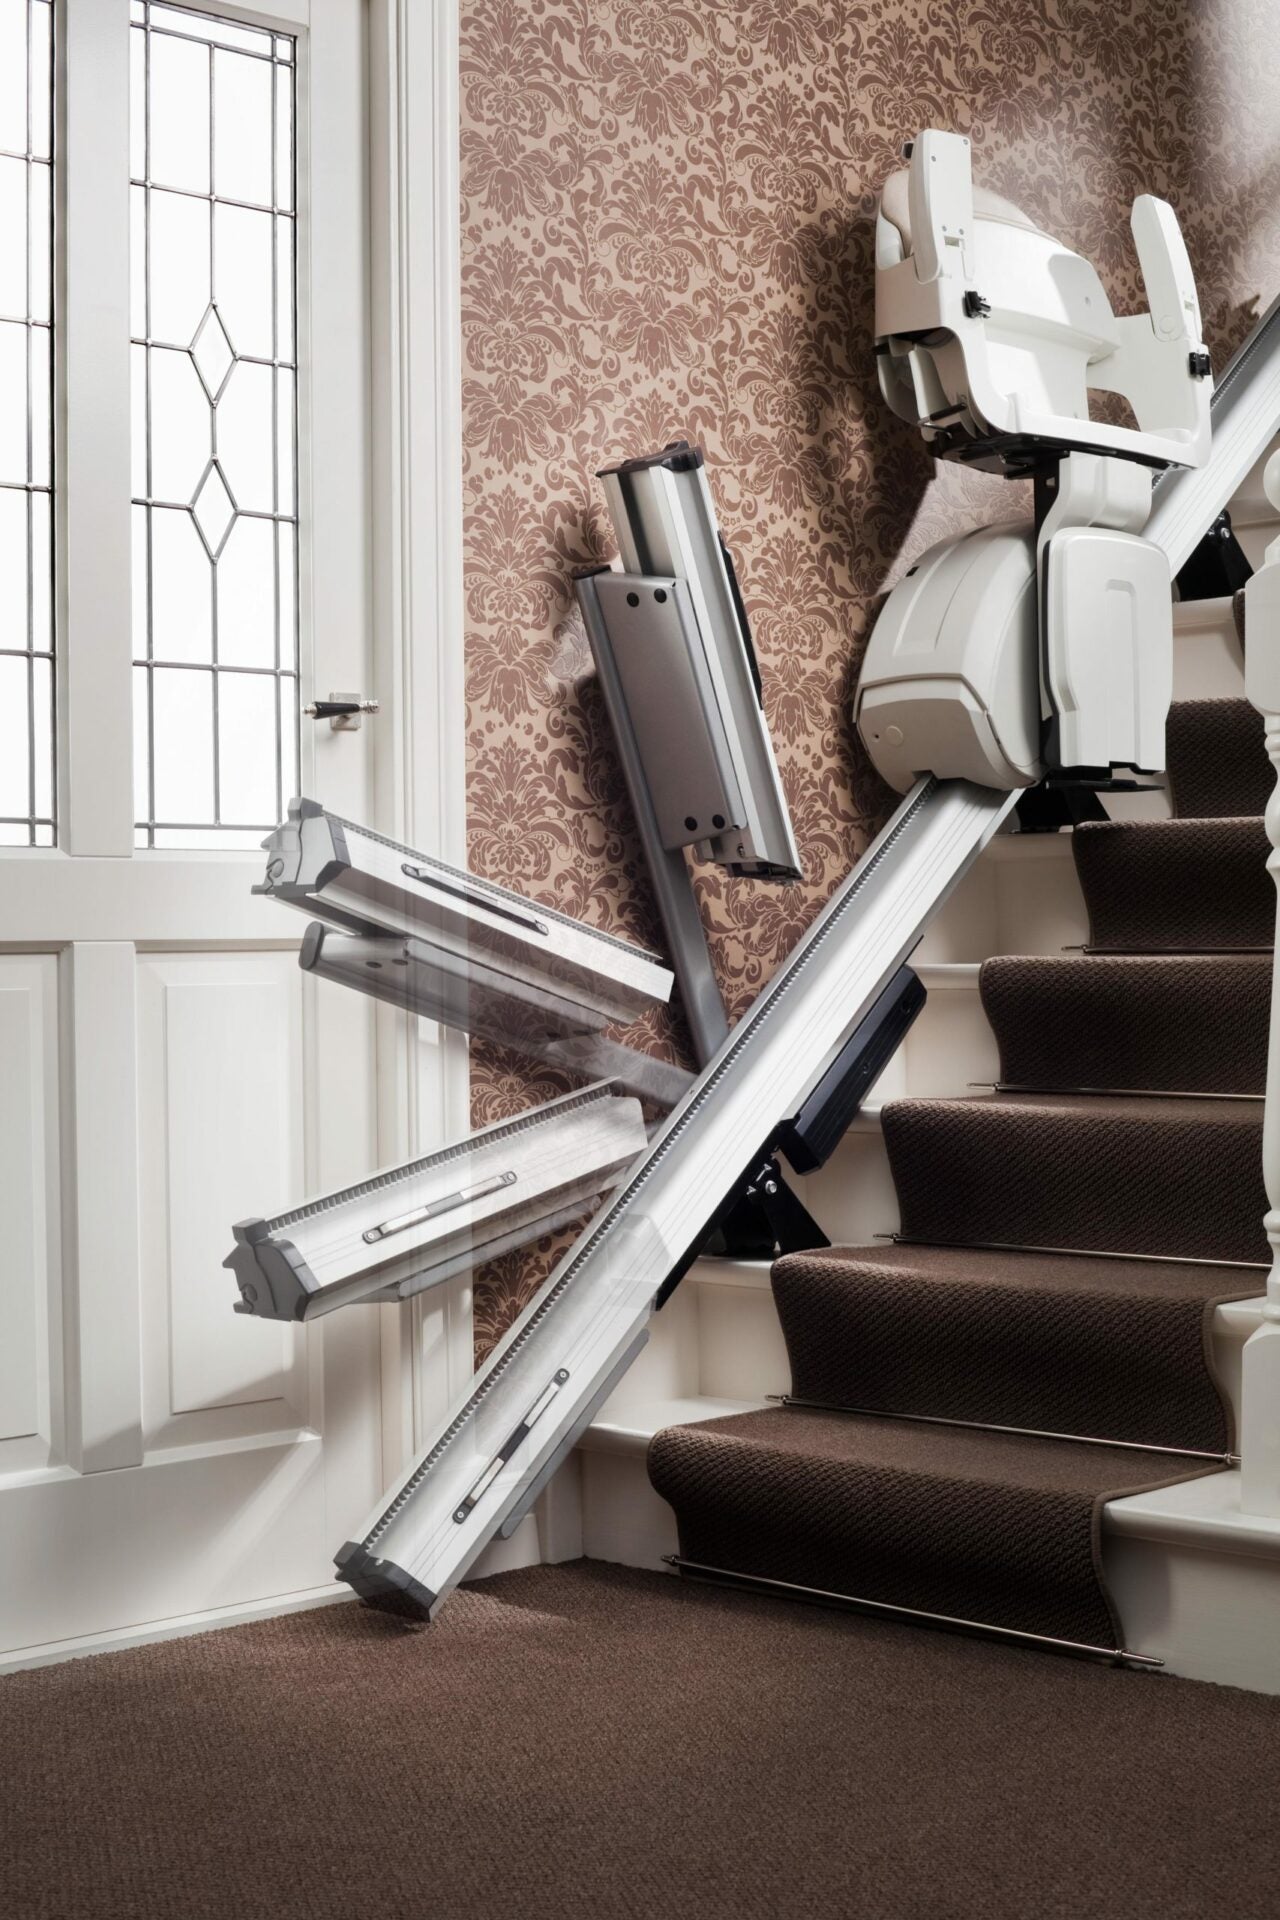 Experience Comfort and Freedom with USA Medical Supply Stairlifts